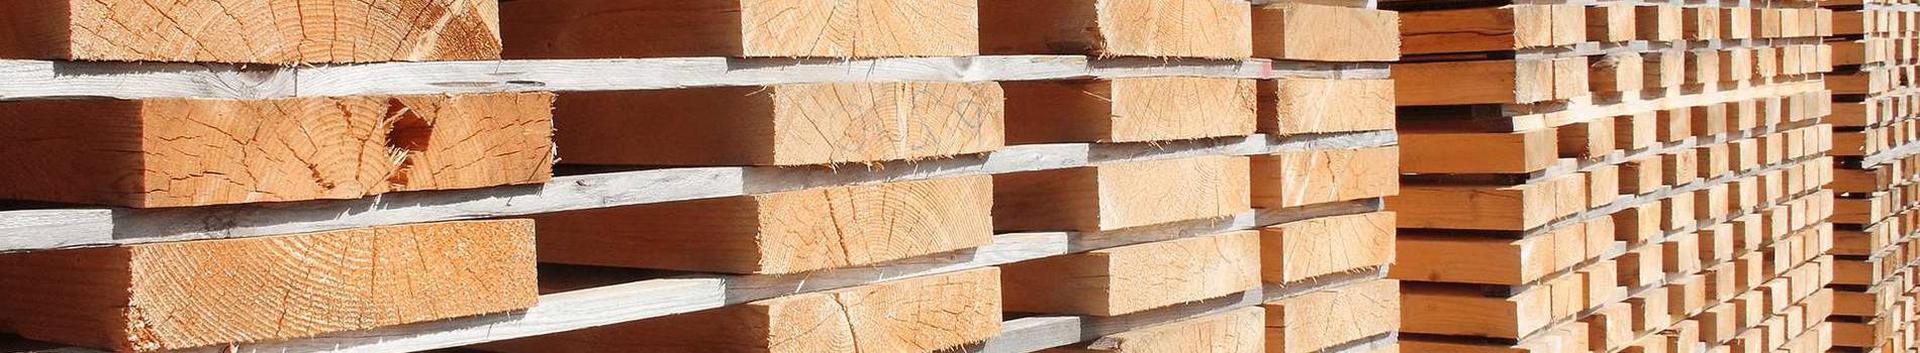 Wood and Paper Industry and other related services, products, consultations